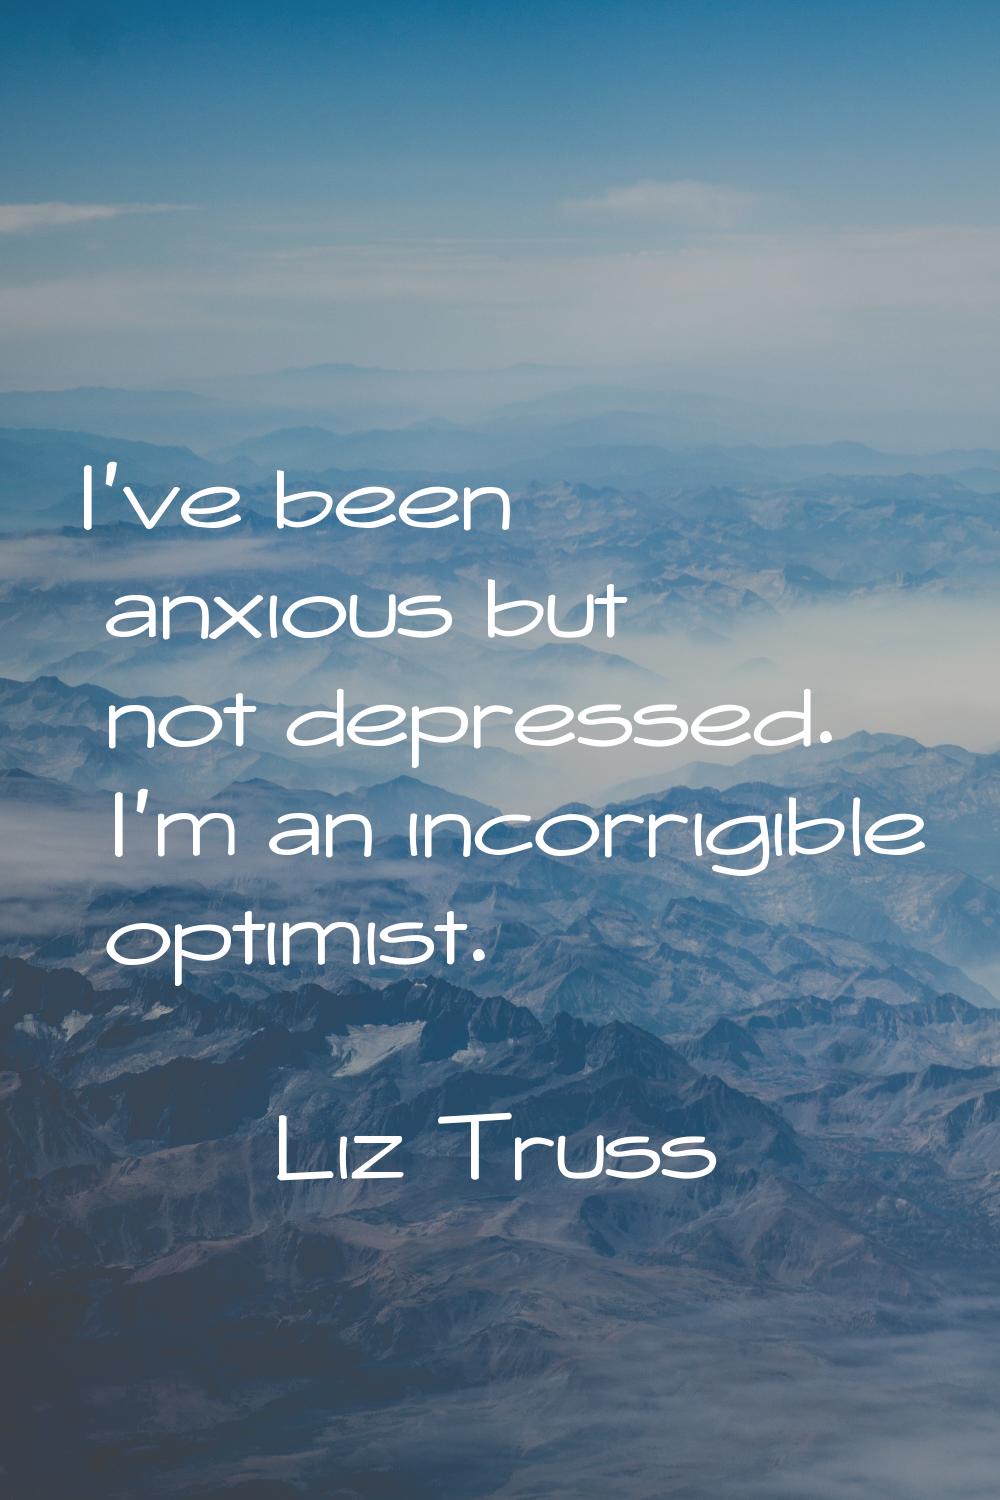 I've been anxious but not depressed. I'm an incorrigible optimist.